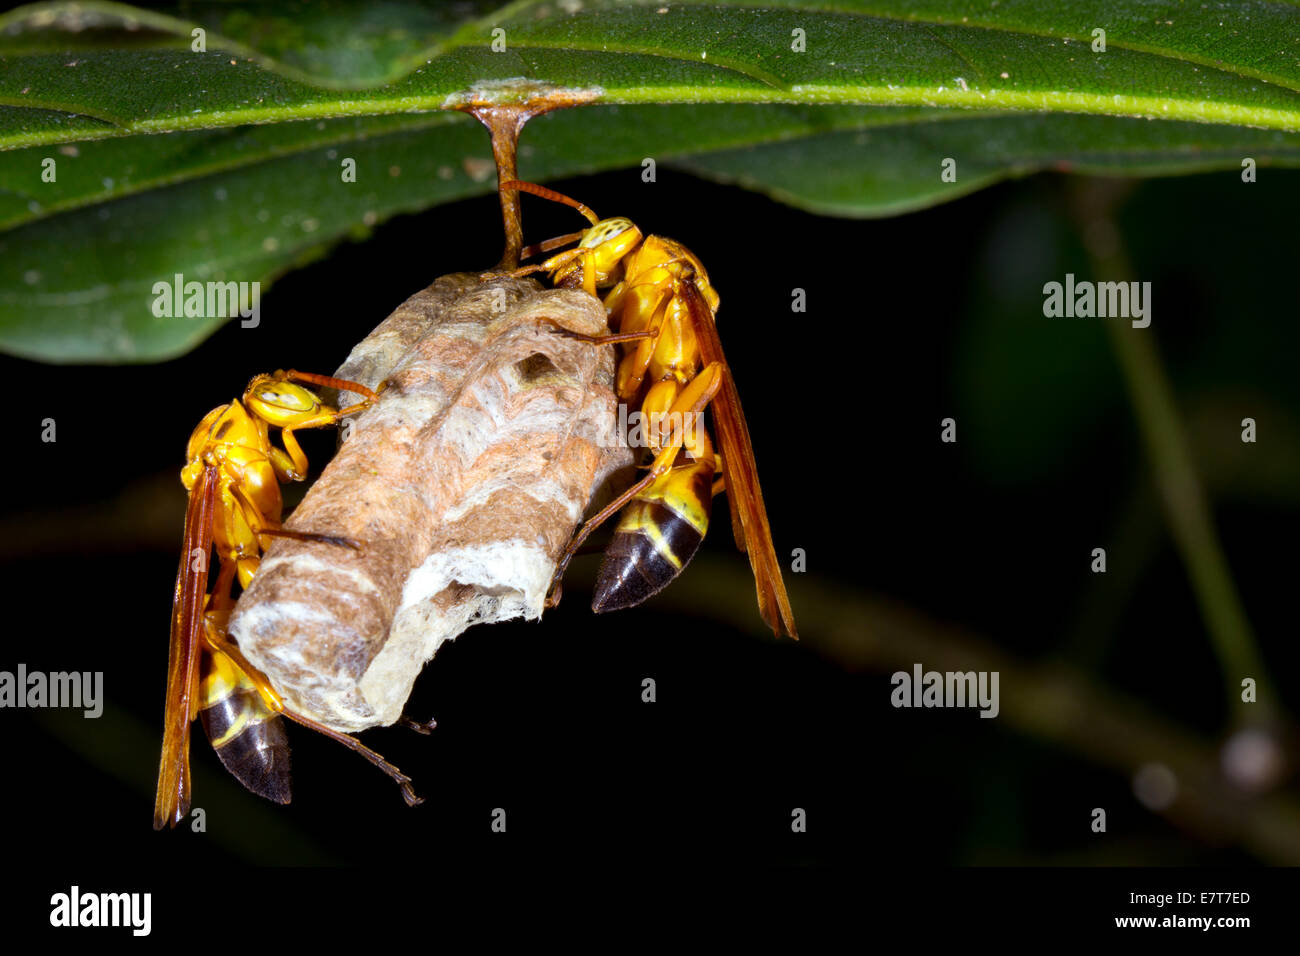 A small wasp nest under a leaf in the rainforest in the Ecuadorian Amazon Stock Photo